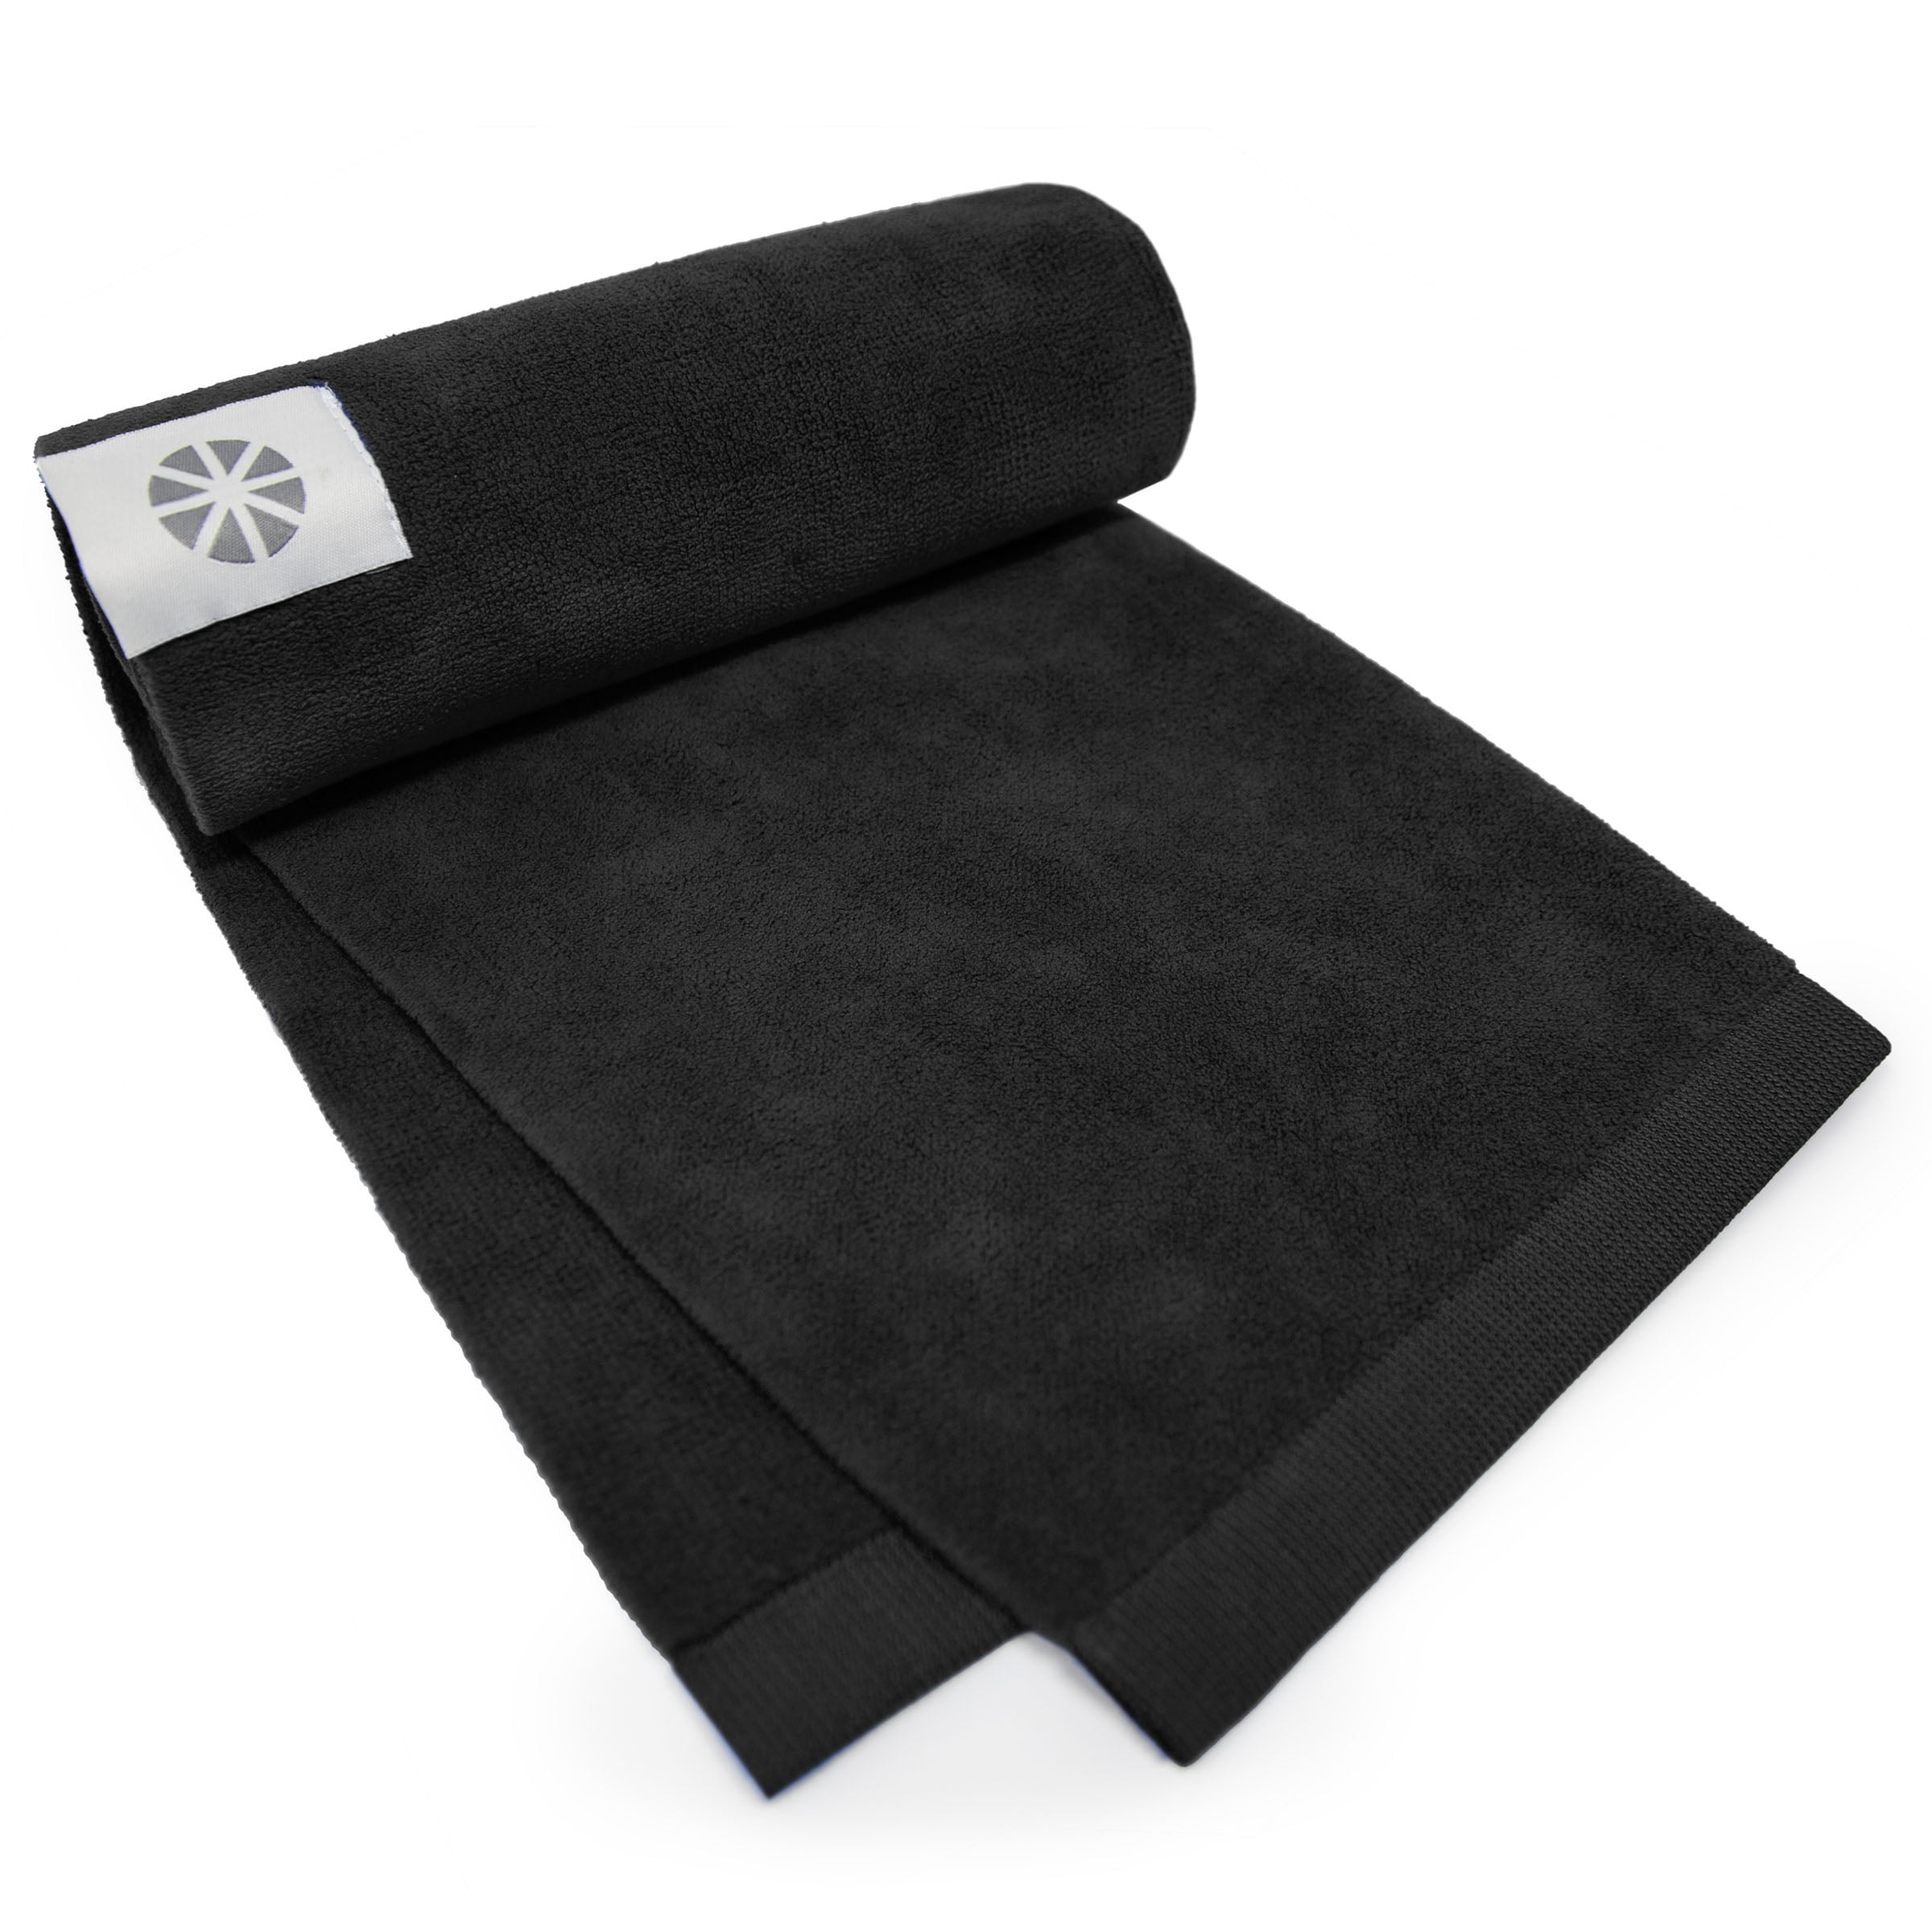  Memphis Black Line Gyms Towel for Men Women Camping Travel Towel  2 Pcs Quick Drying Towels Super Absorbent Microfiber Towel for Sport :  Sports & Outdoors